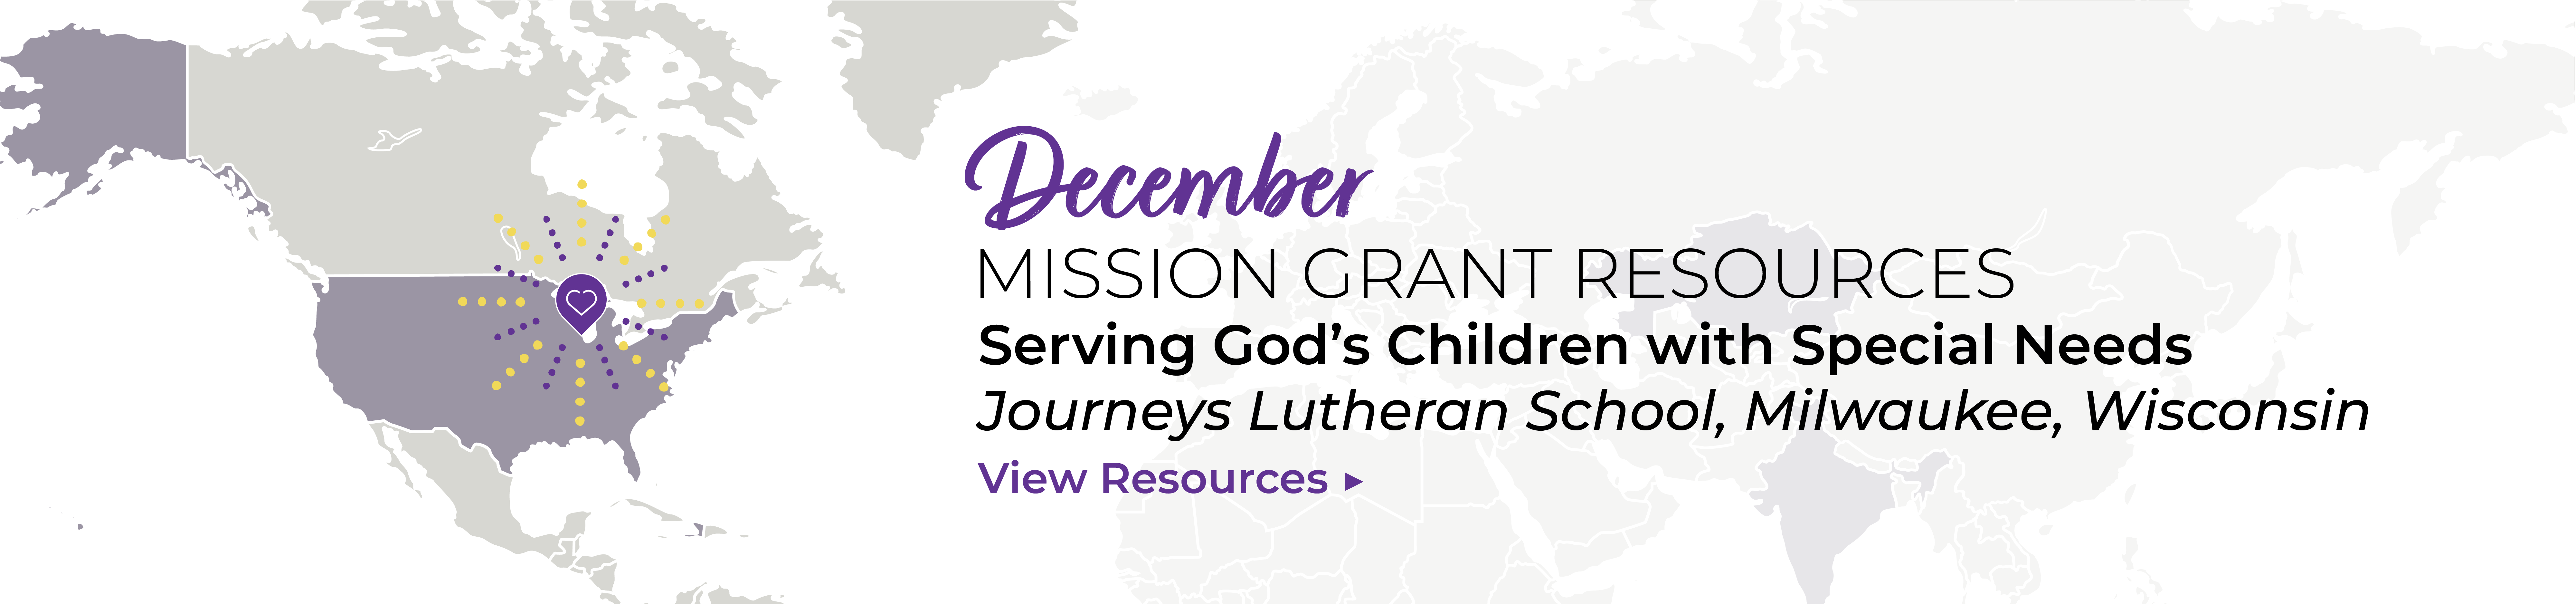 December Mission Grant Resources: Serving God's Children with Special Needs. View Resources.